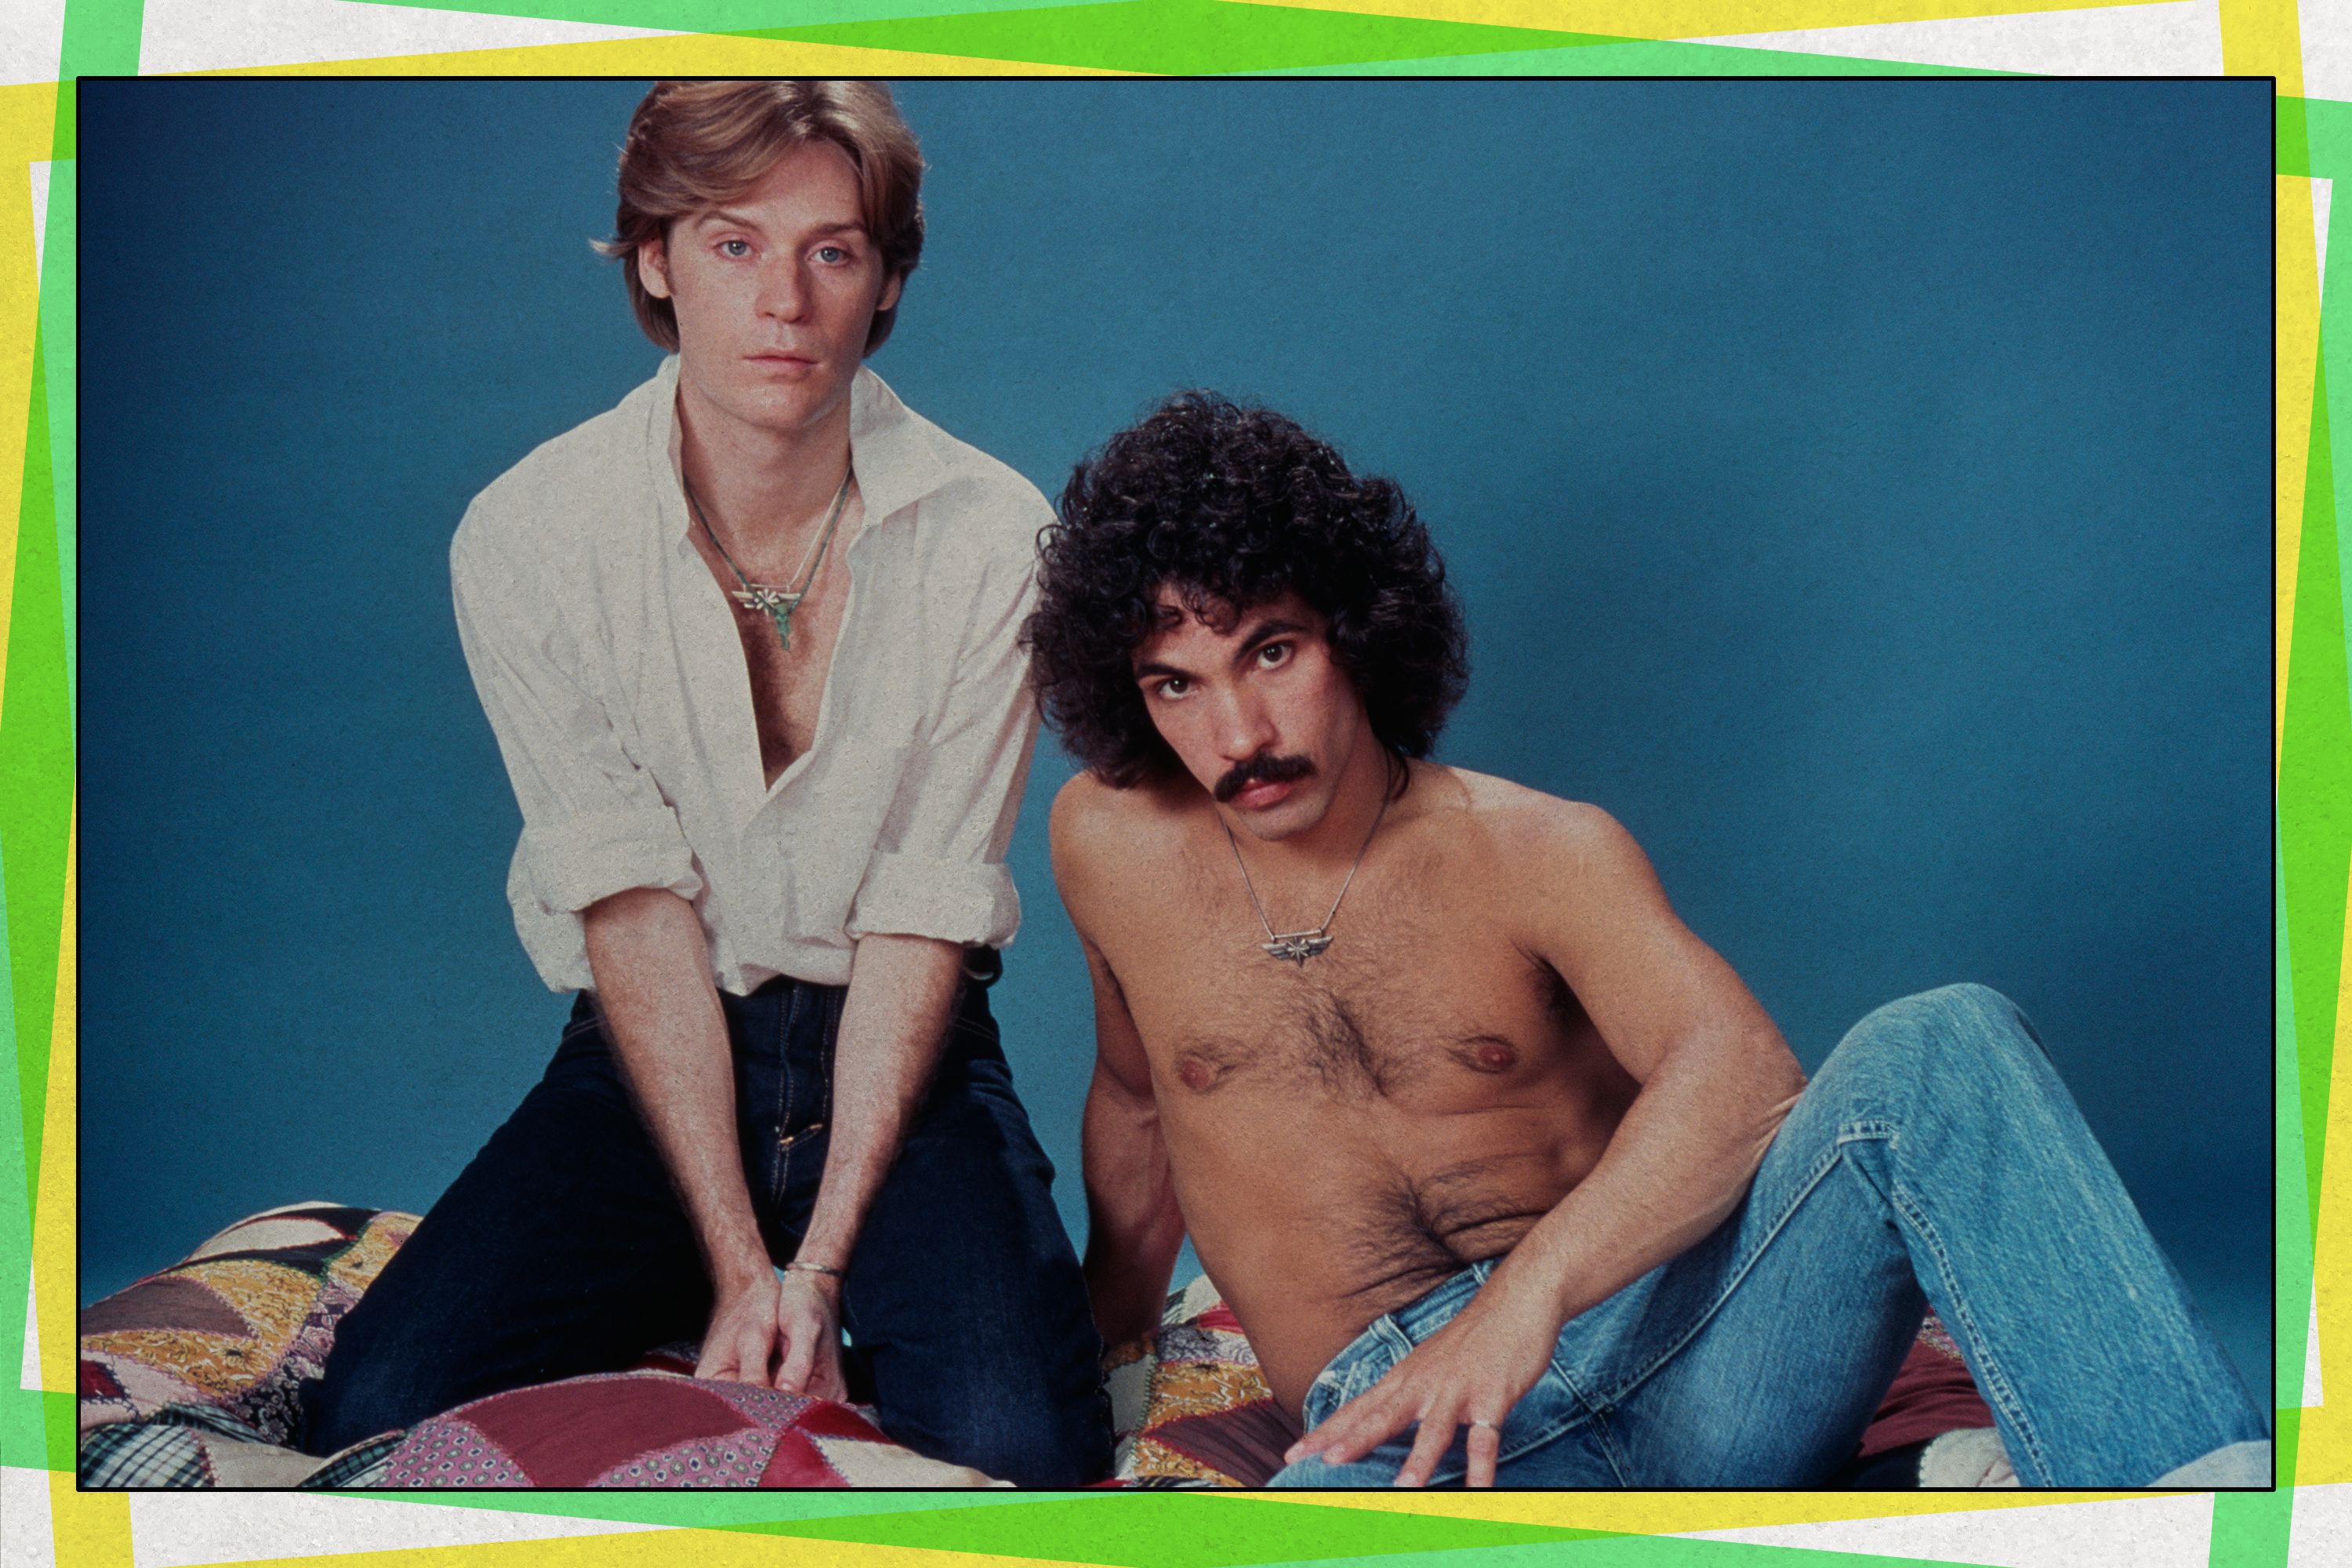 Hall & Oates The Bisexual Pop Rock Duo Who May Or May Not Be A Couple